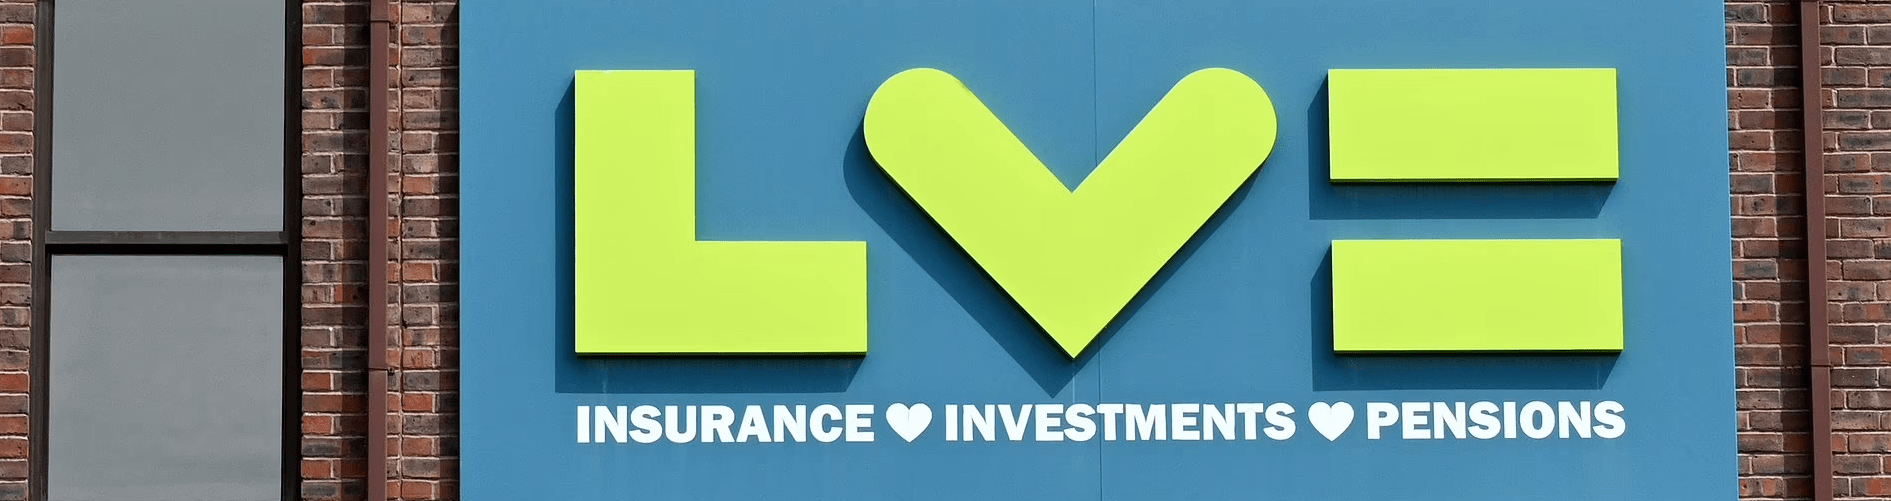 Liverpool Victoria Insurance Review